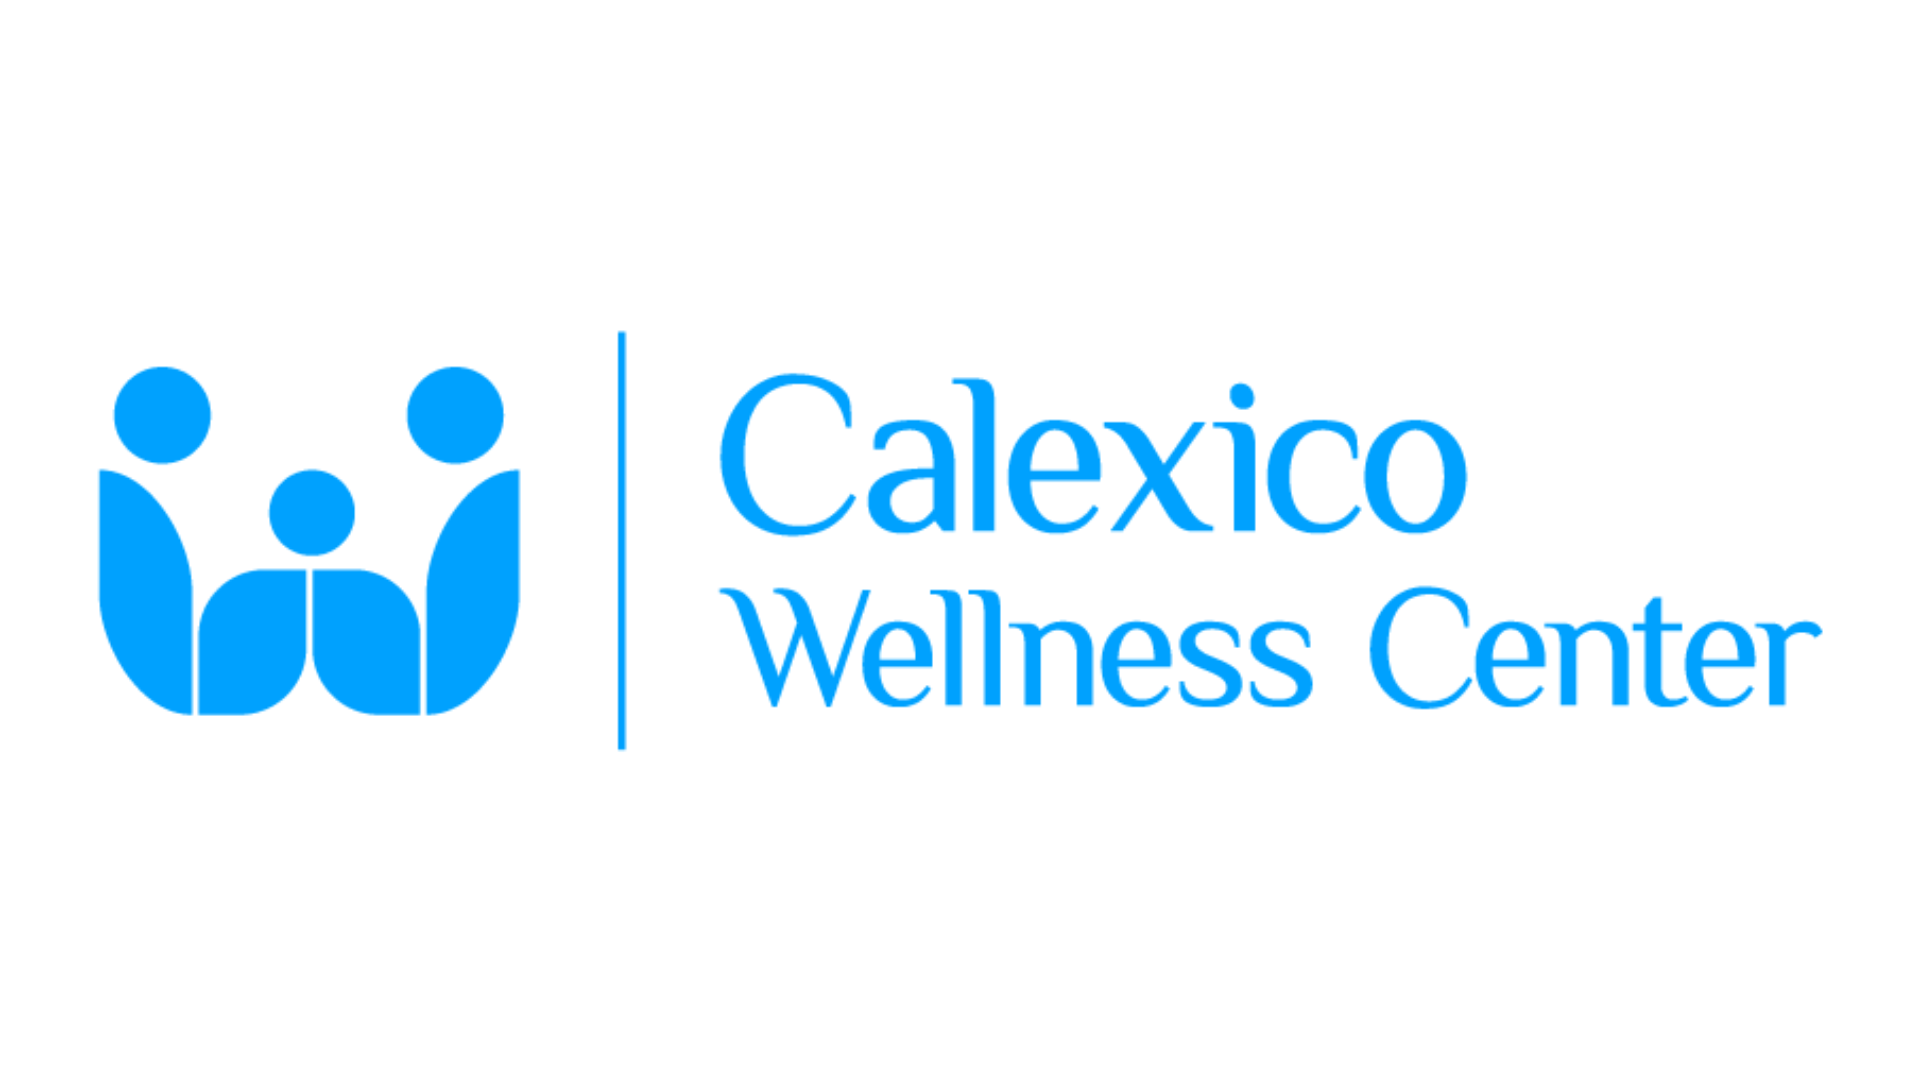 Blue icons and text reading Calexico Wellness Center on a white background